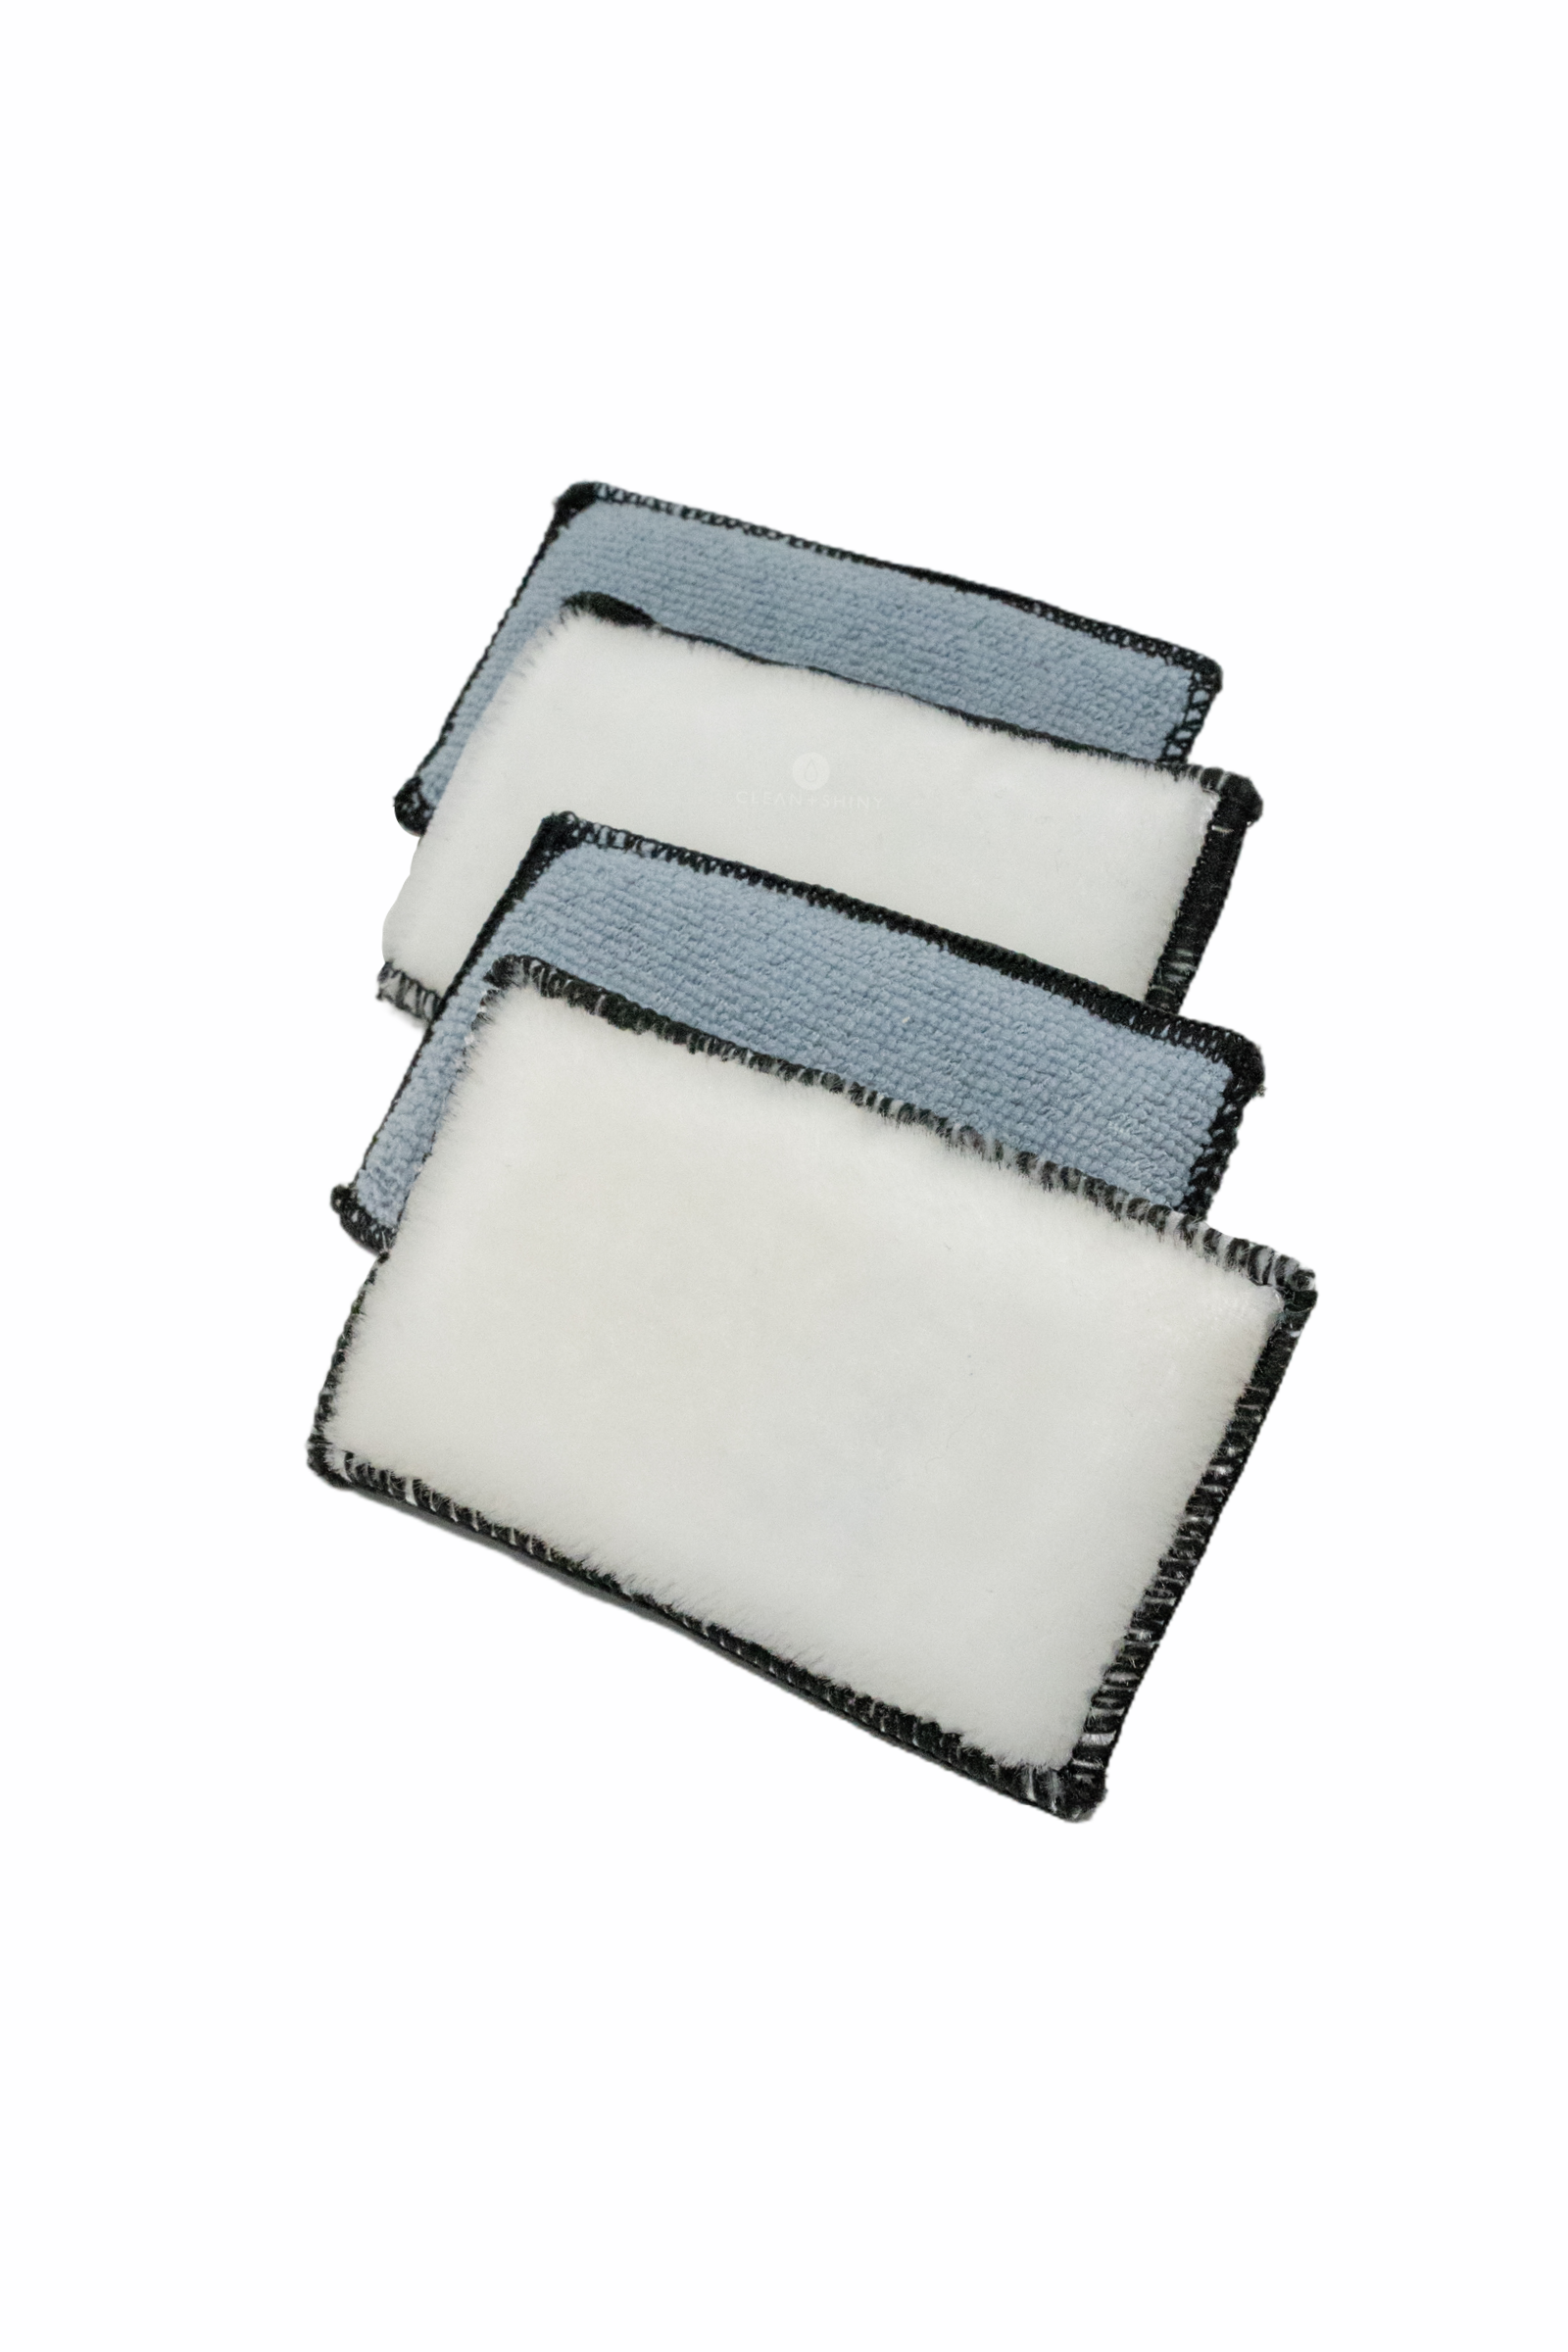 Clean and Shiny Scrub It 3000 Interior 2 in 1 Pad - 135 x 90mm - 4 Pack